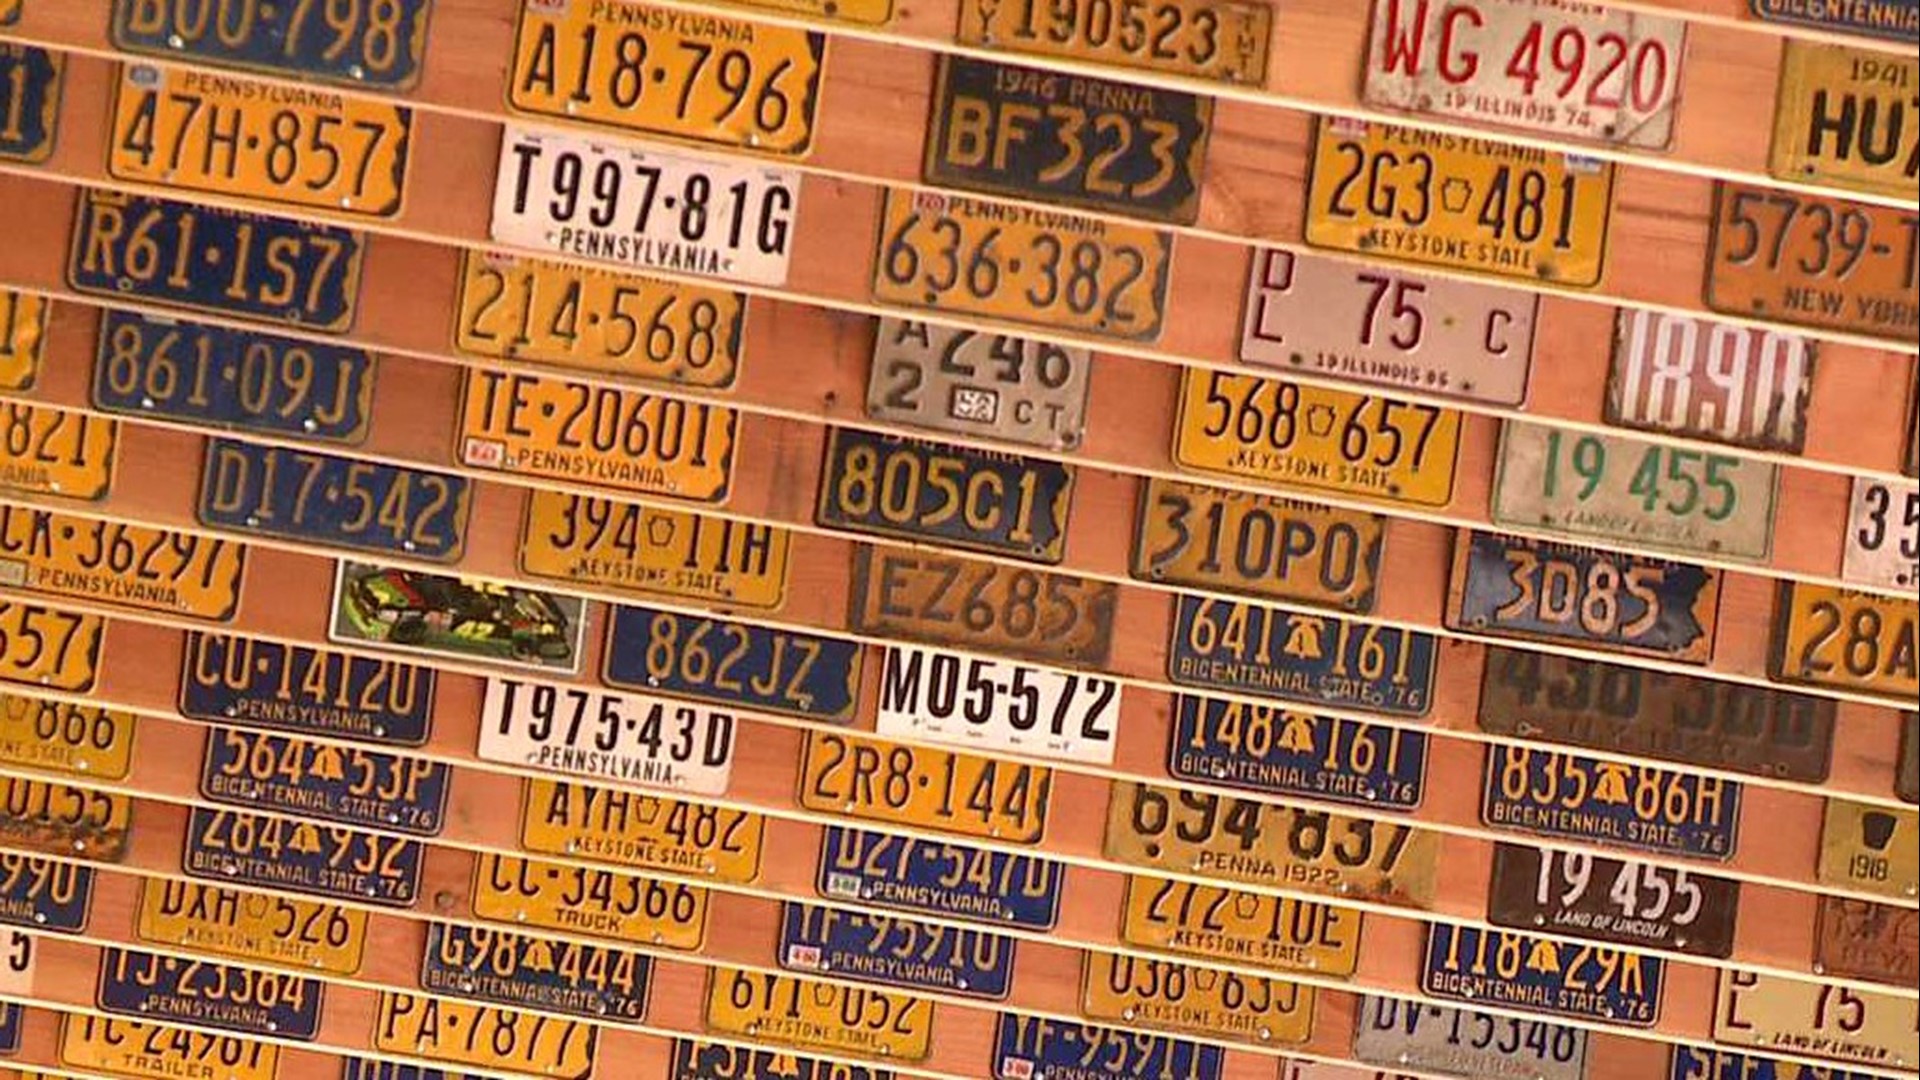 License Plate Collector